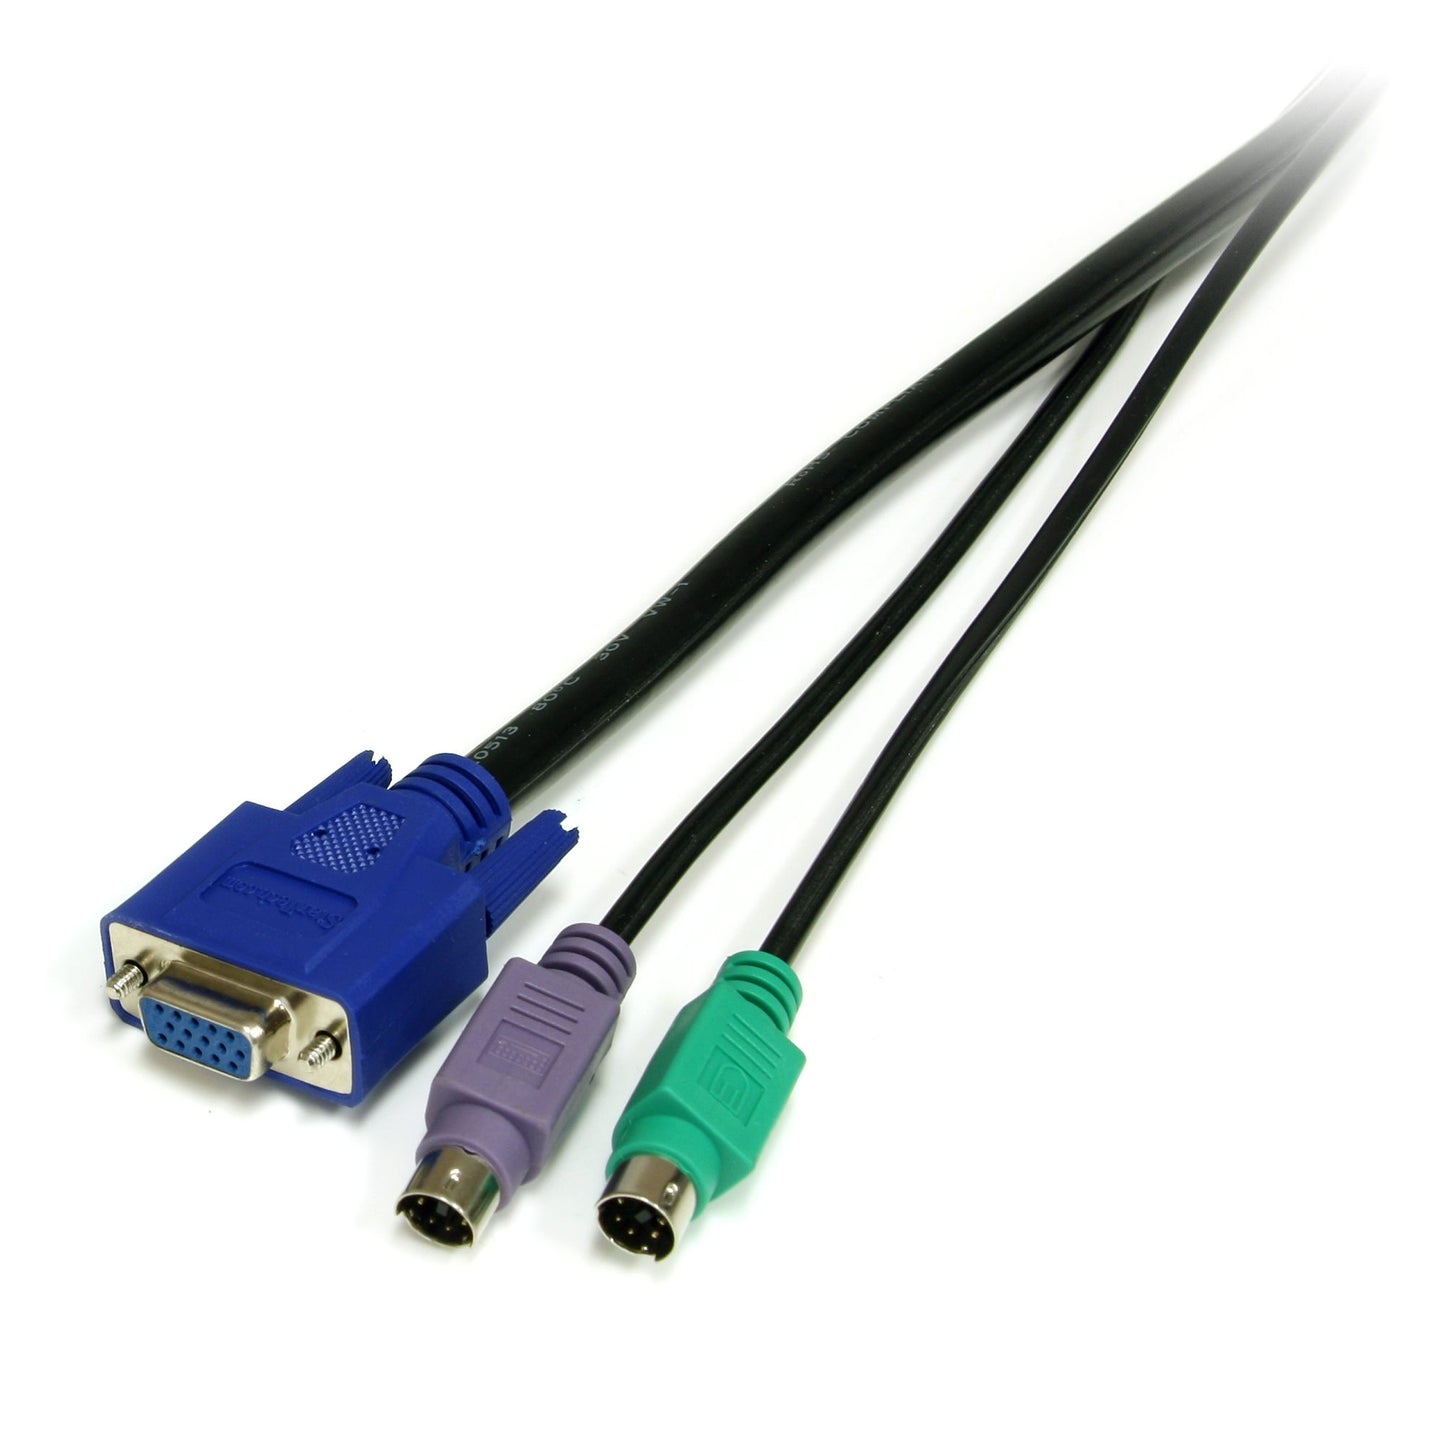 6ft PS/2 Style 3 in 1 KVM Switch Cable